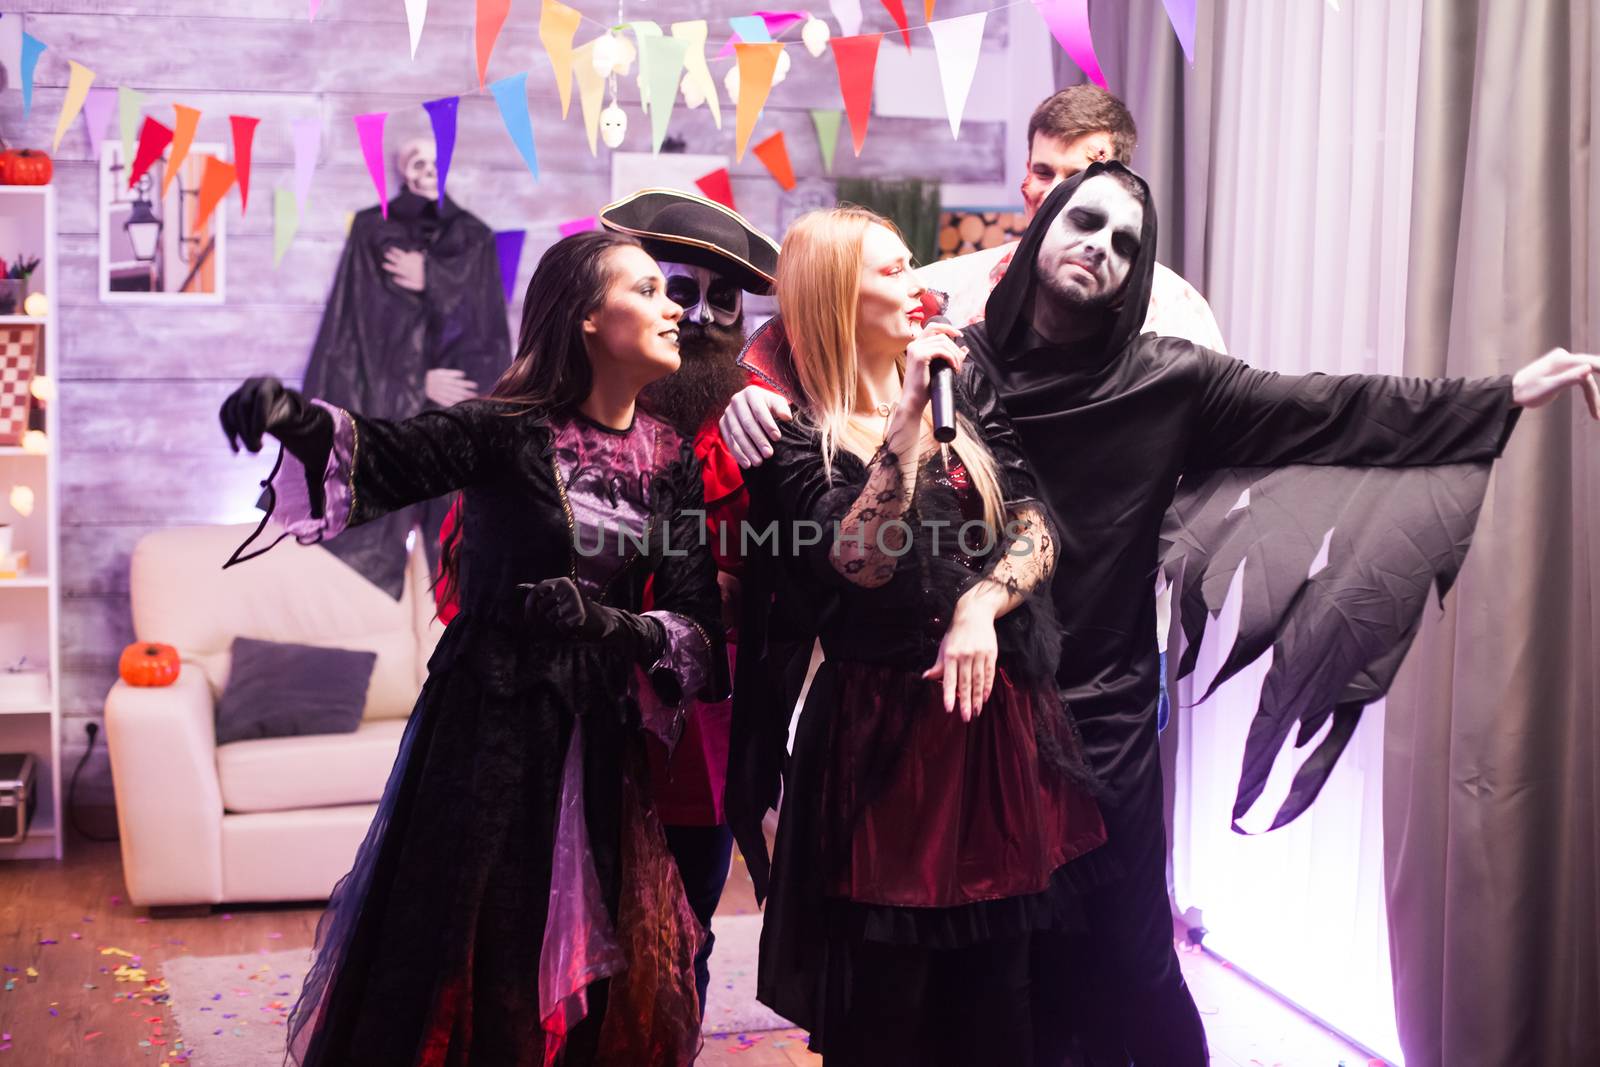 Attractive vampire woman singing at a halloween party by DCStudio